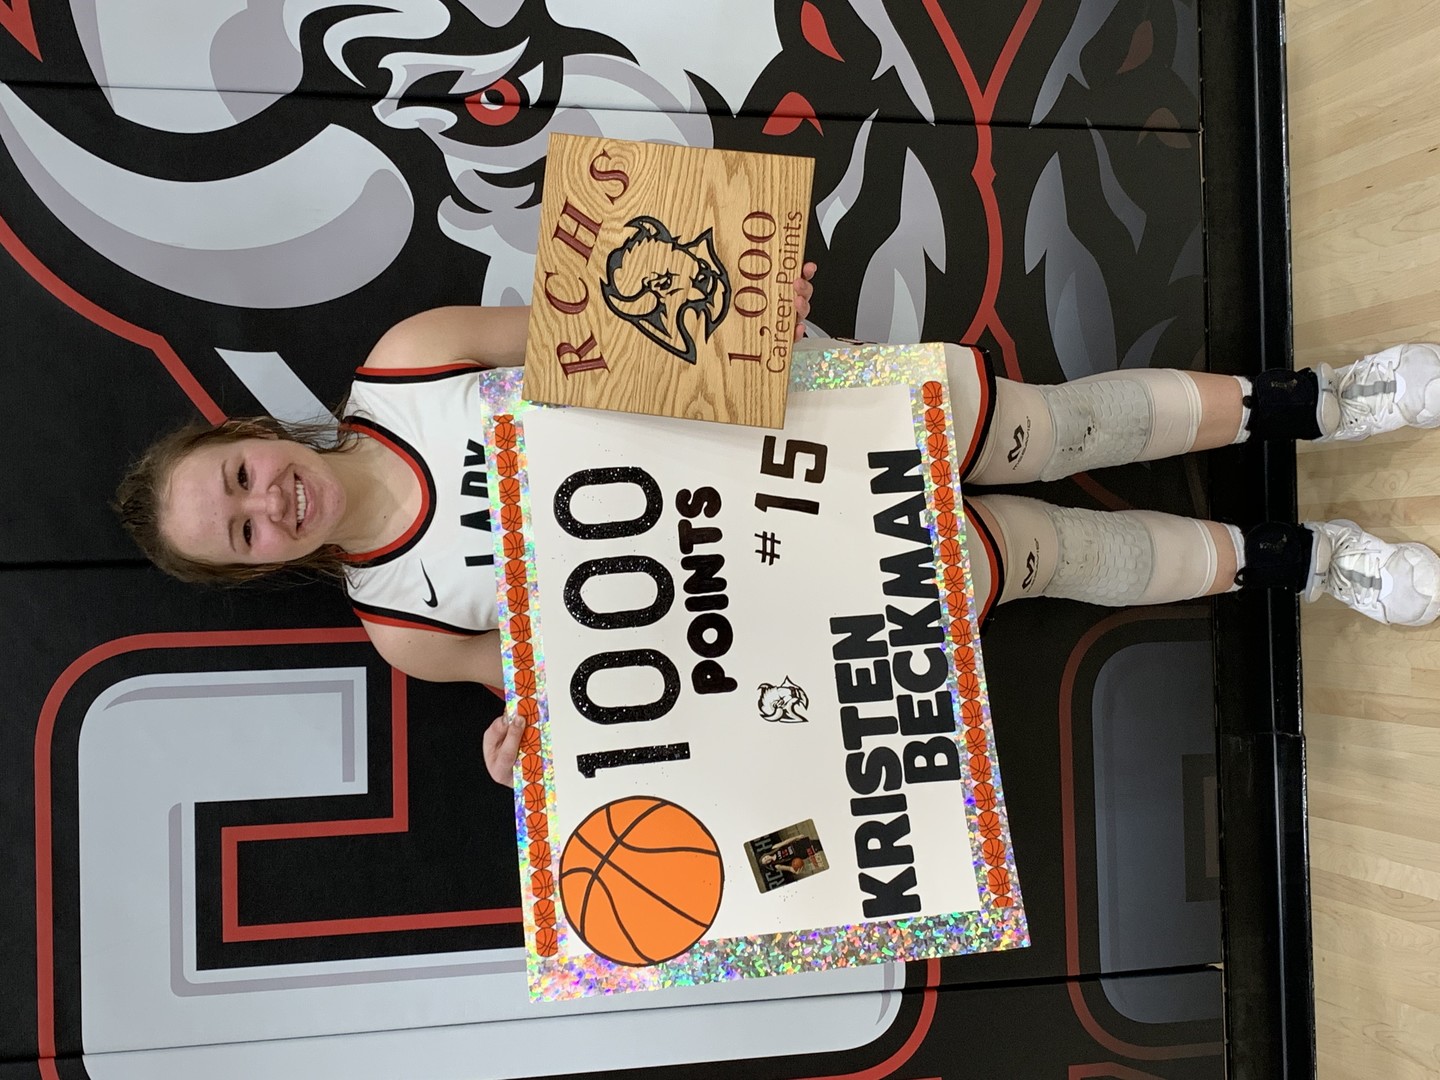 Congratulations to Kristen Beckman for making 1,000 Career Points!!